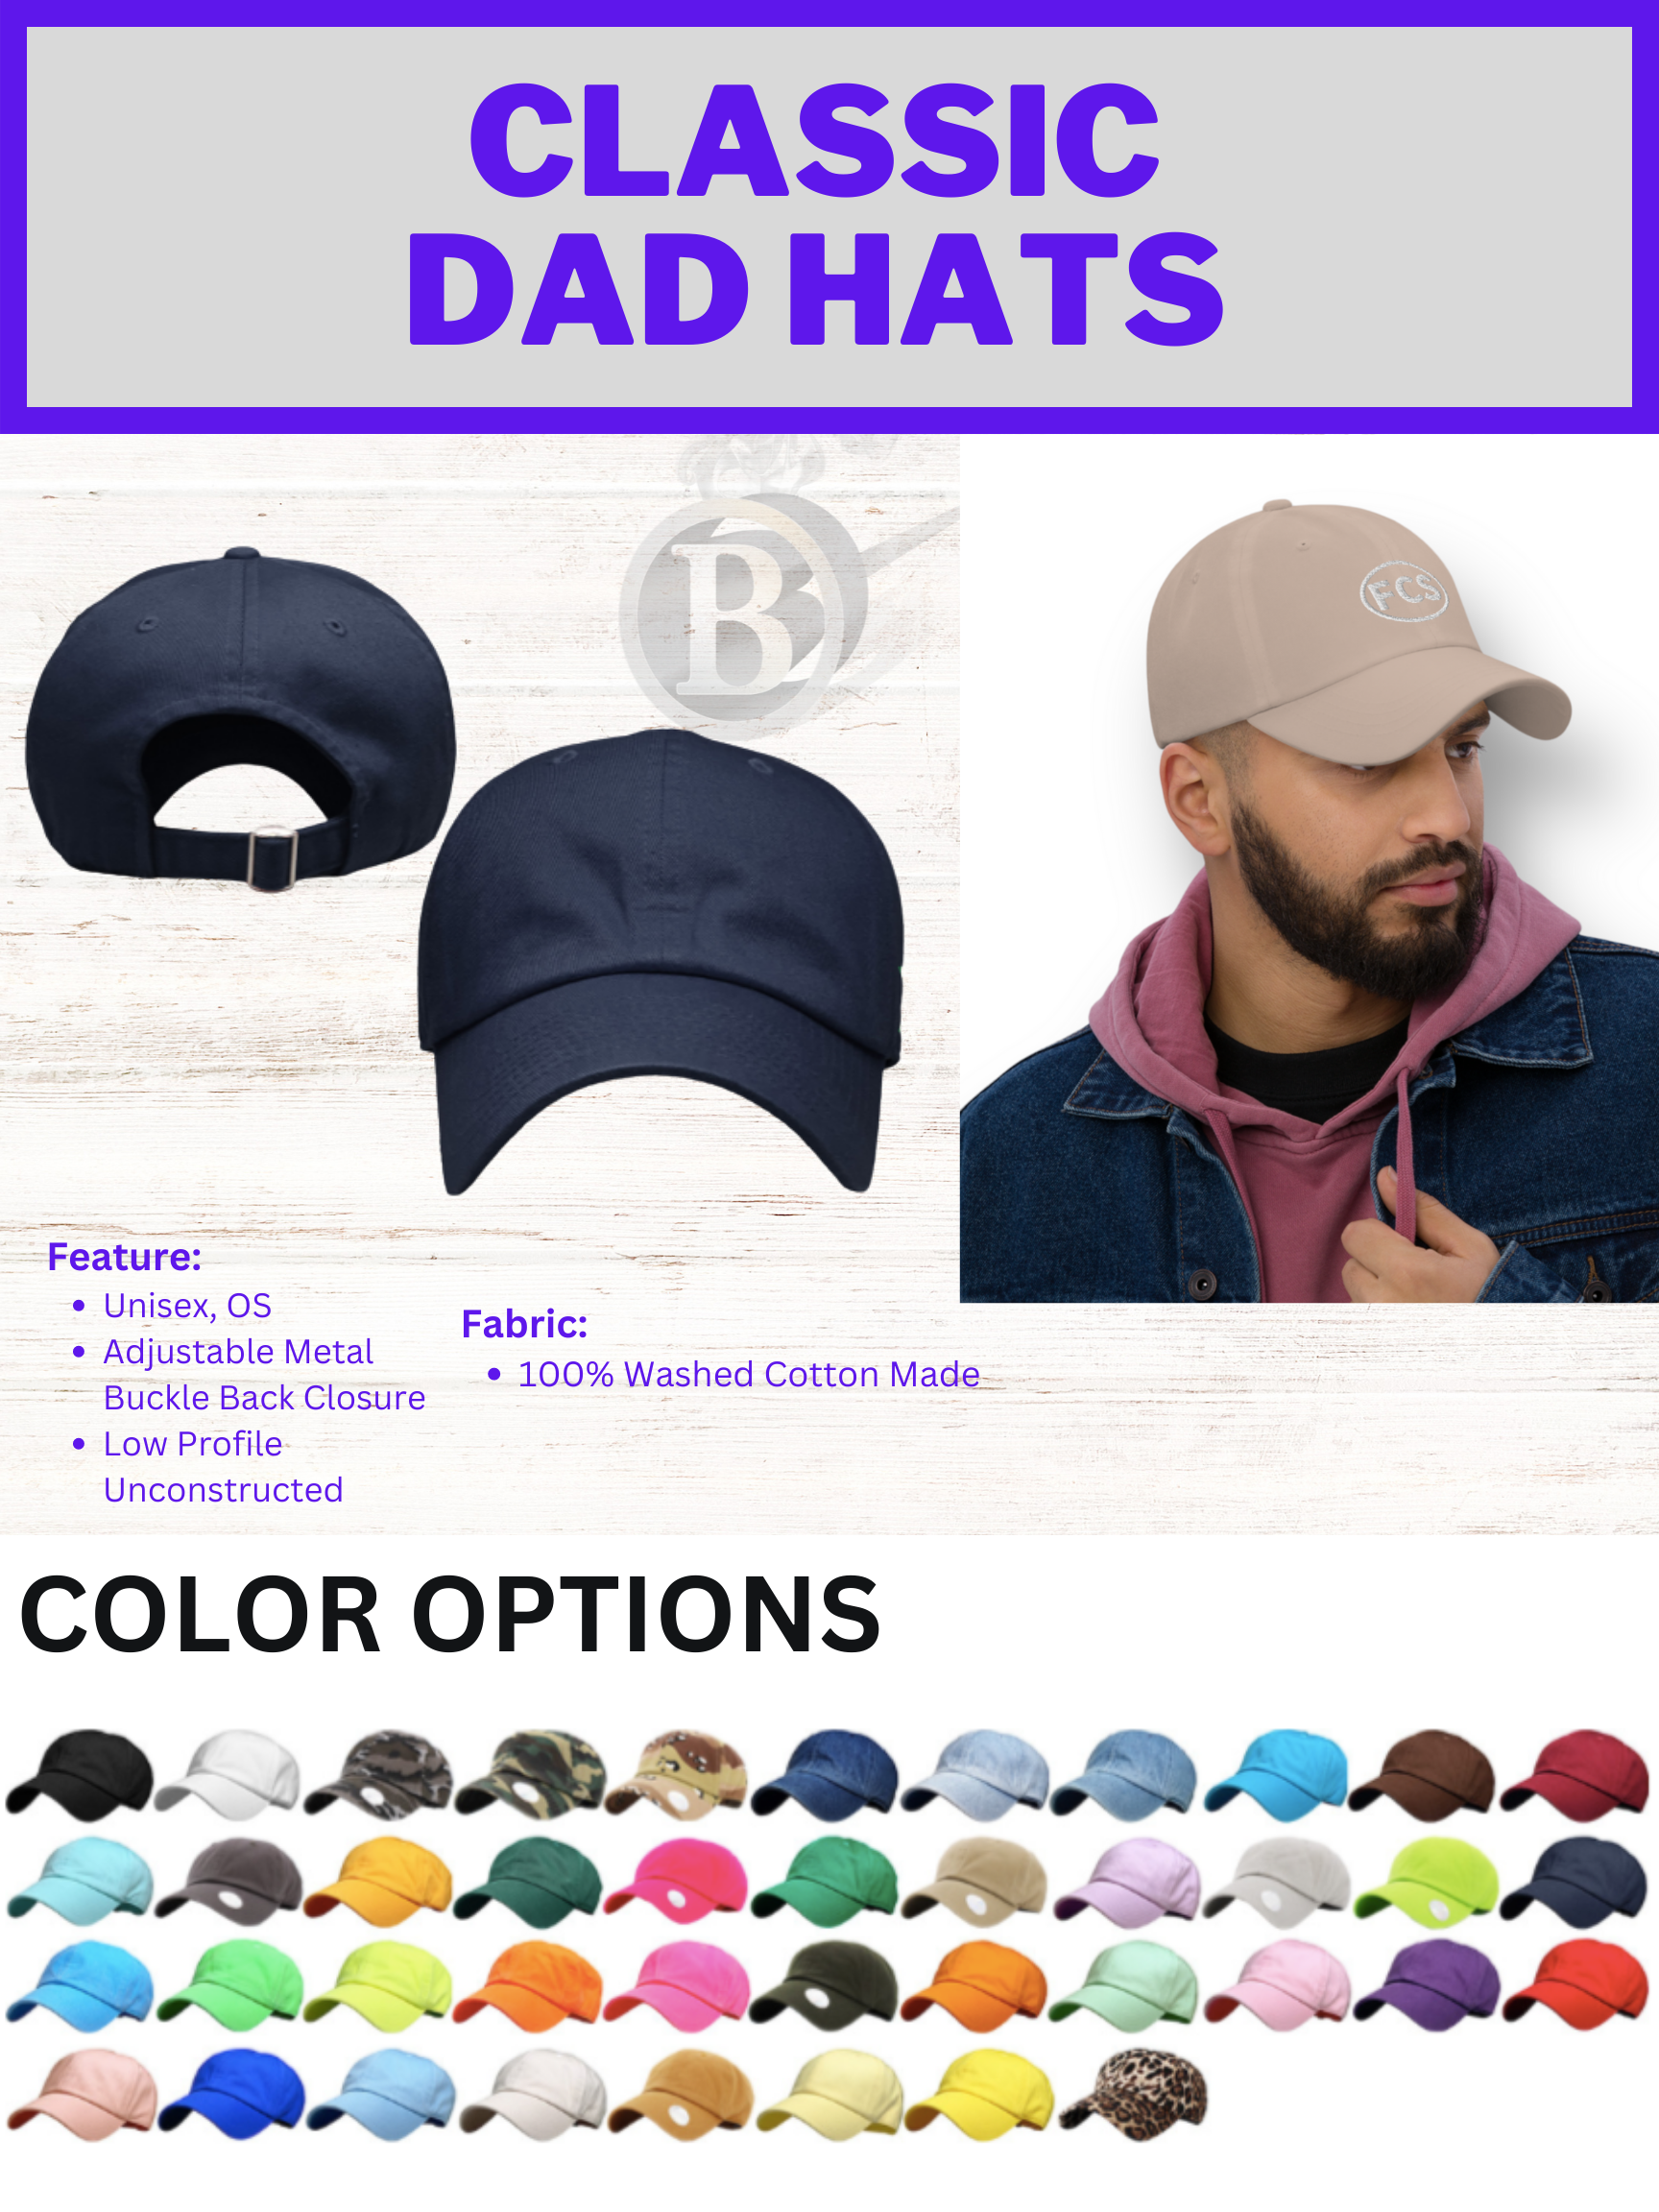 KBE-CLASSIC - Embroidered hats, custom embroidered dad hats, embroidered baseball caps 